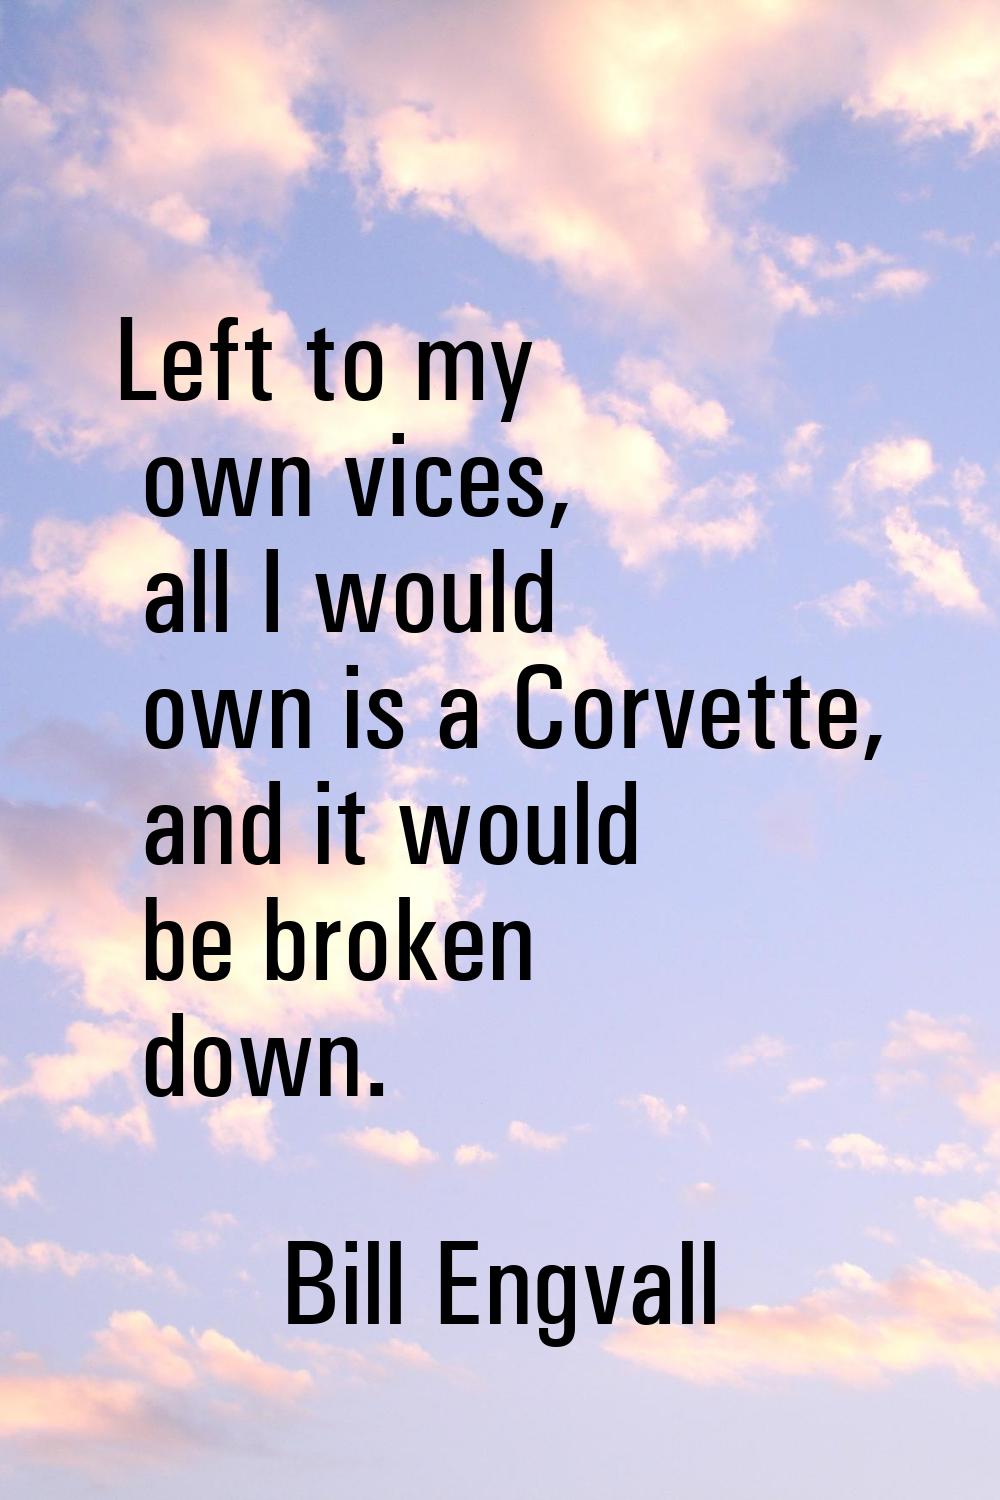 Left to my own vices, all I would own is a Corvette, and it would be broken down.